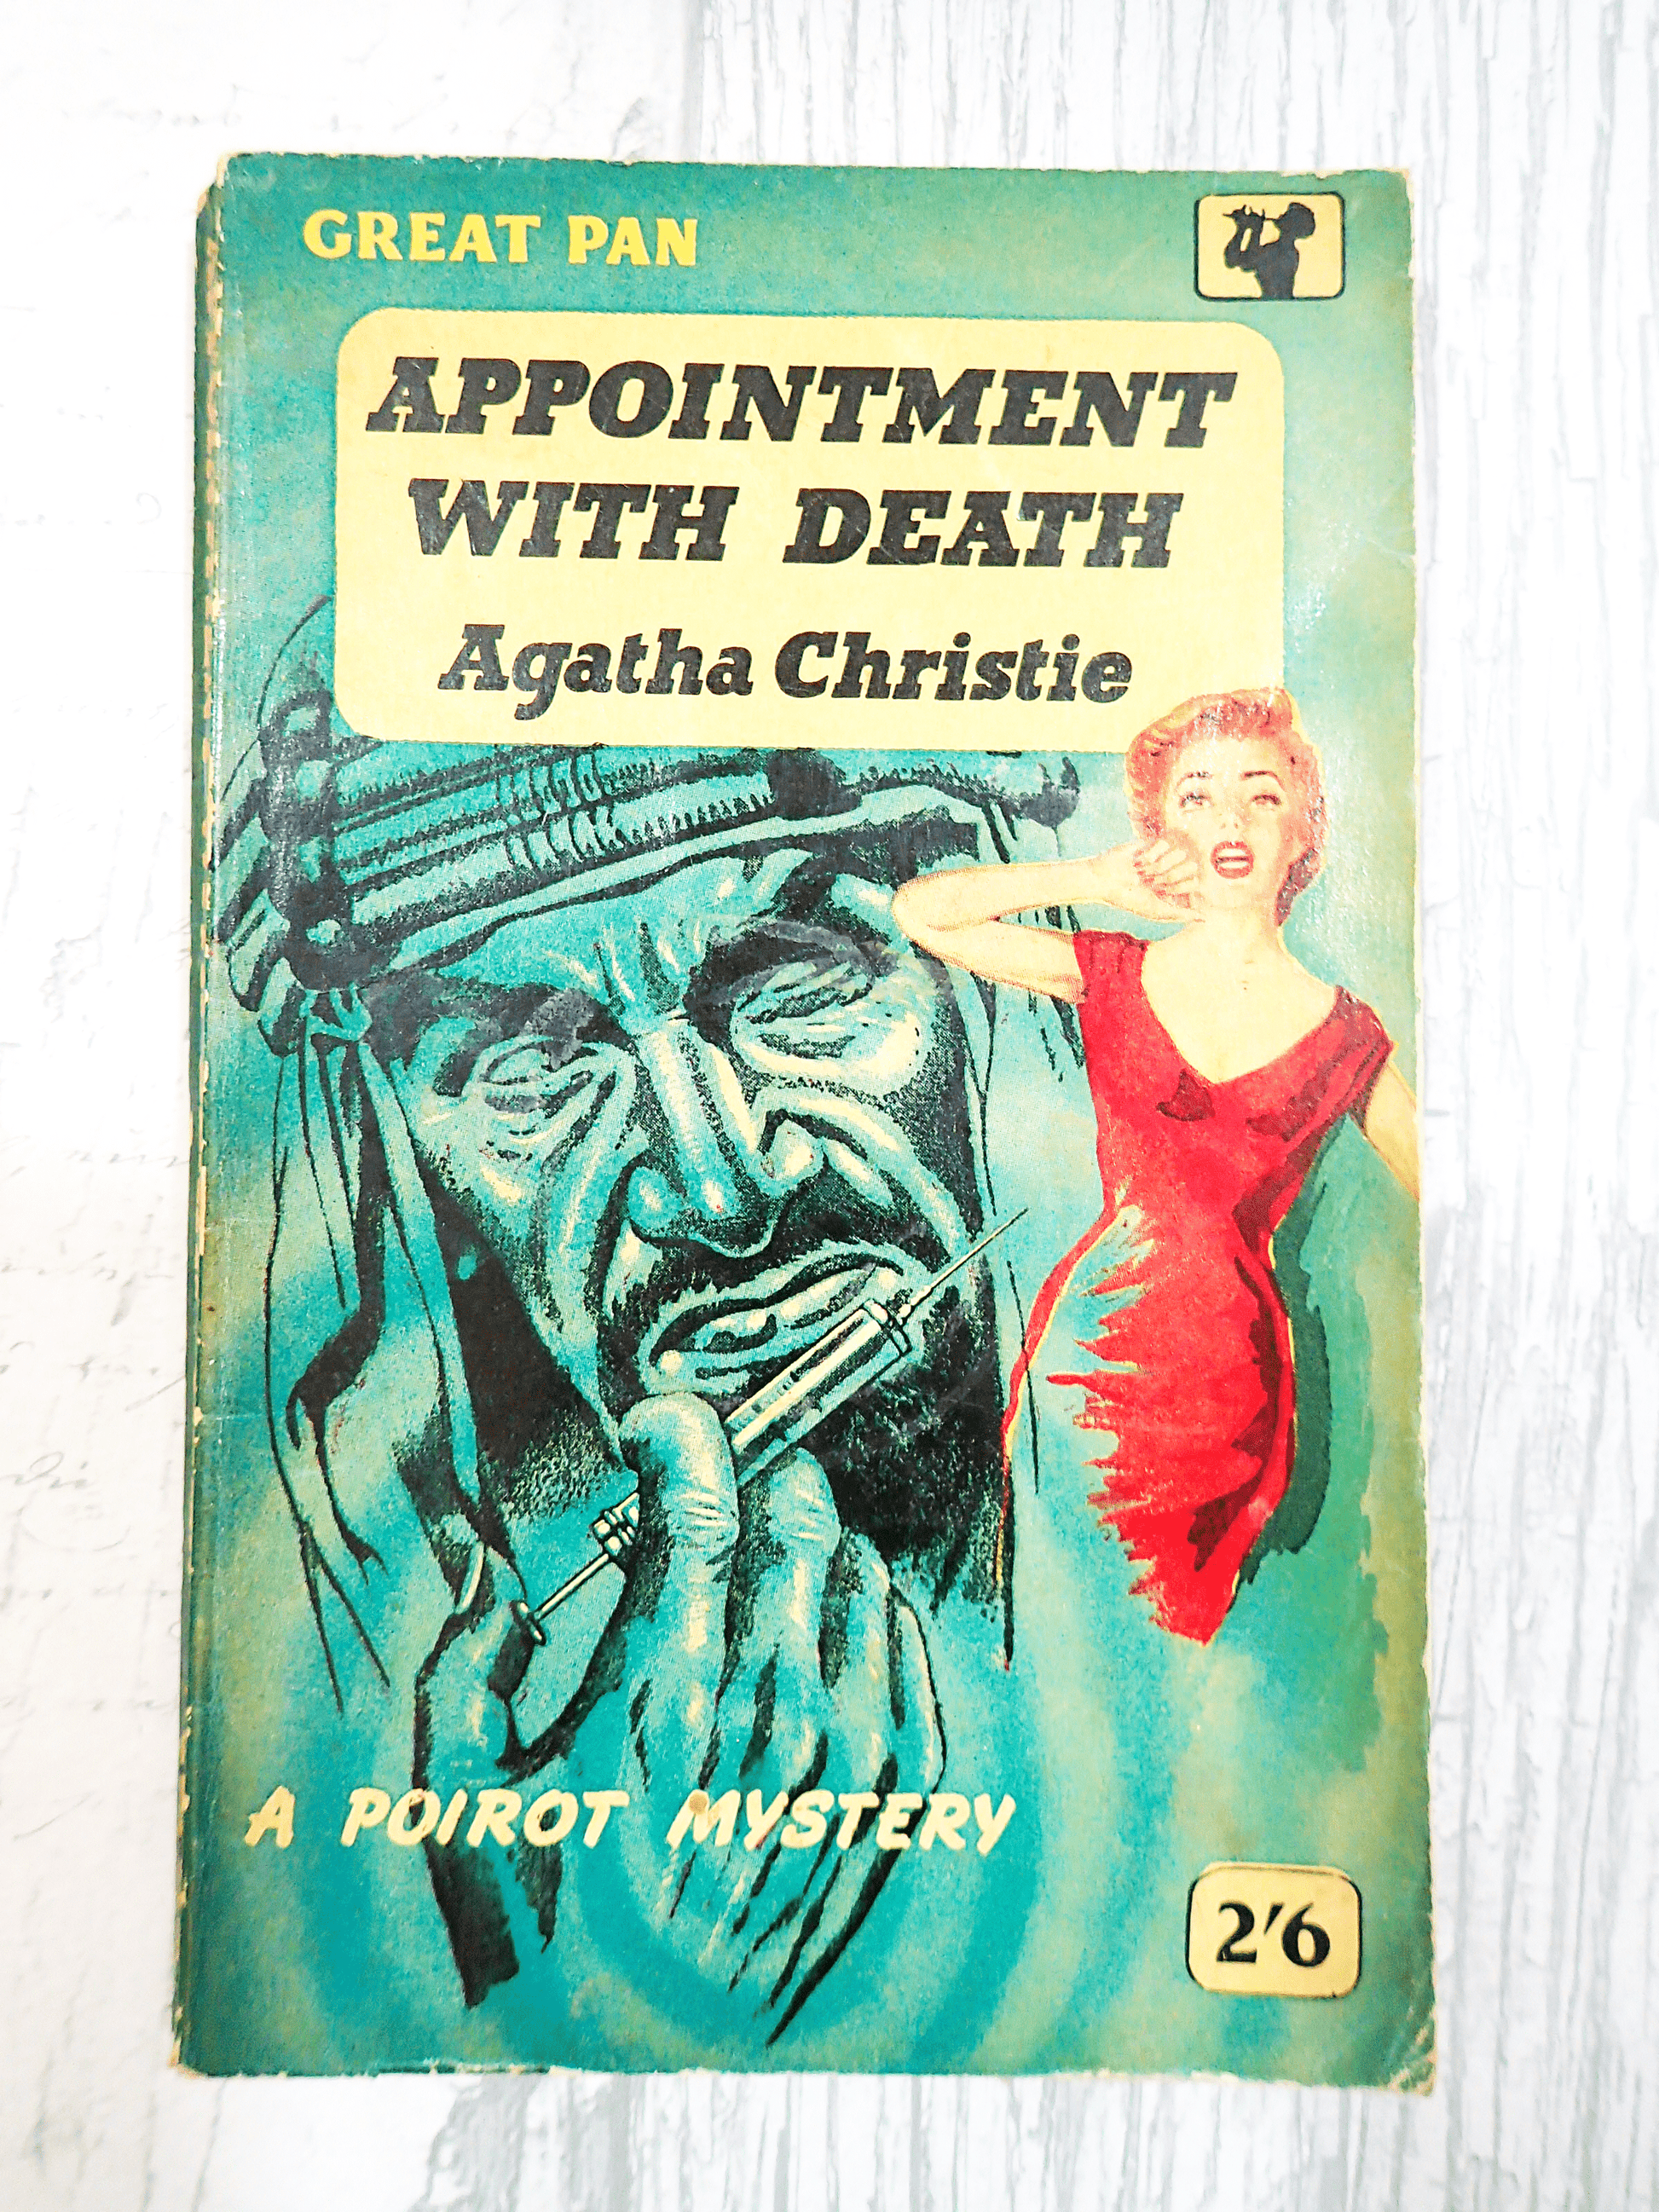 Front Cover of Appointment with Death Agatha Christie Great Pan Paperback Vintage Crime Book 1950's showing a distressed woman in Red with a giant image of a sheik with a syringe behind her against a light background.